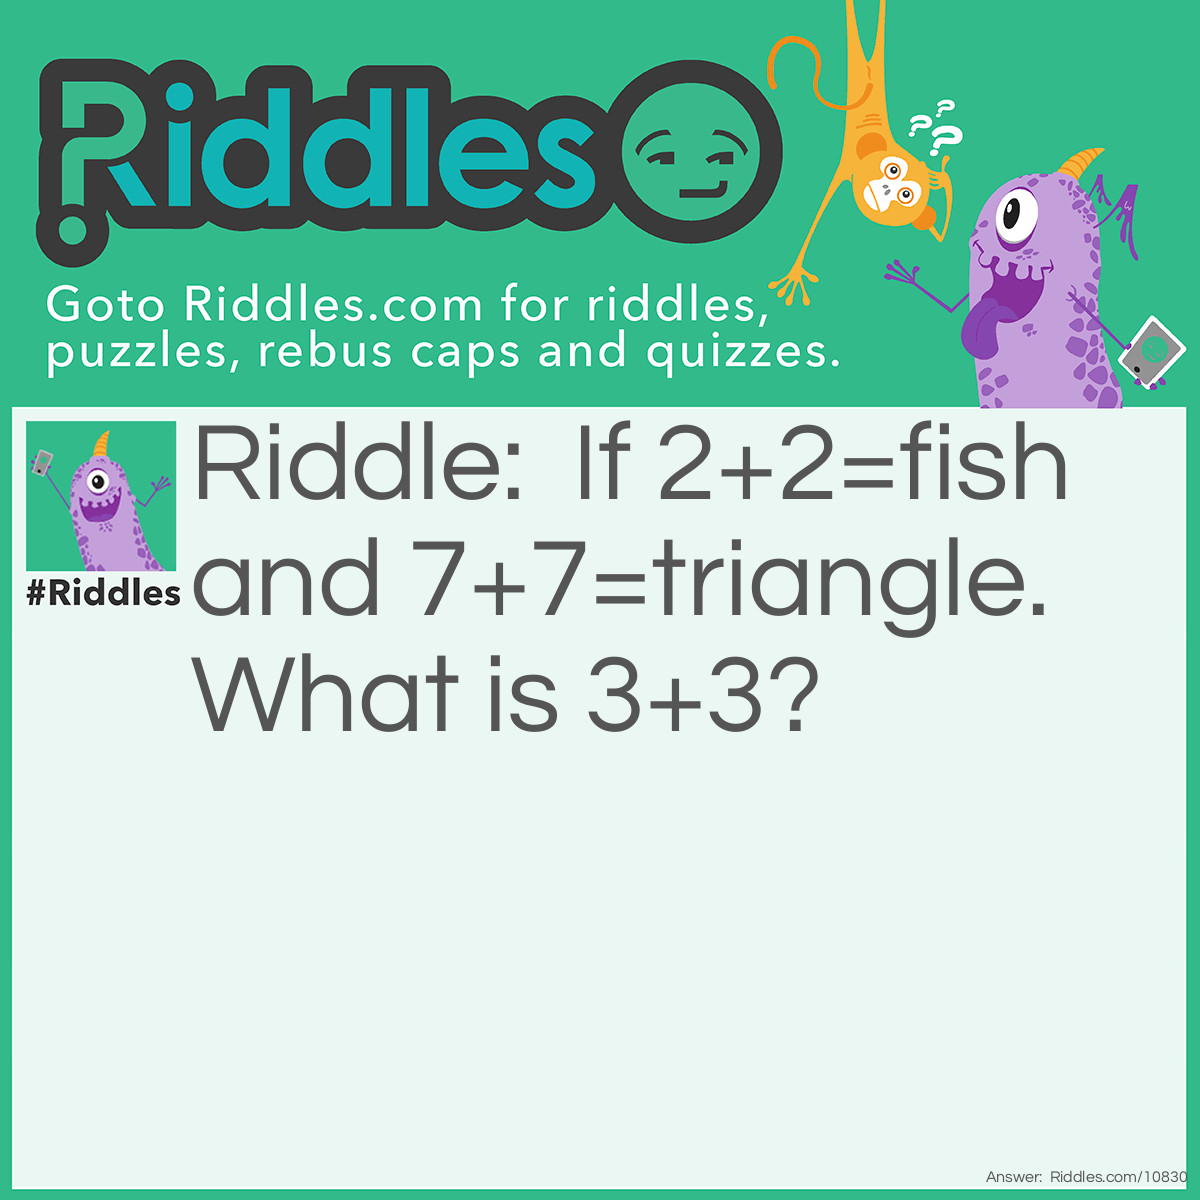 Riddle: If 2+2=fish and 7+7=triangle. What is 3+3? Answer: 8. If you put 2 and 2 together, you get a fish, and if you put 7 and 7 together, you get a triangle. So if you put 3 and 3 together, you will get 8.